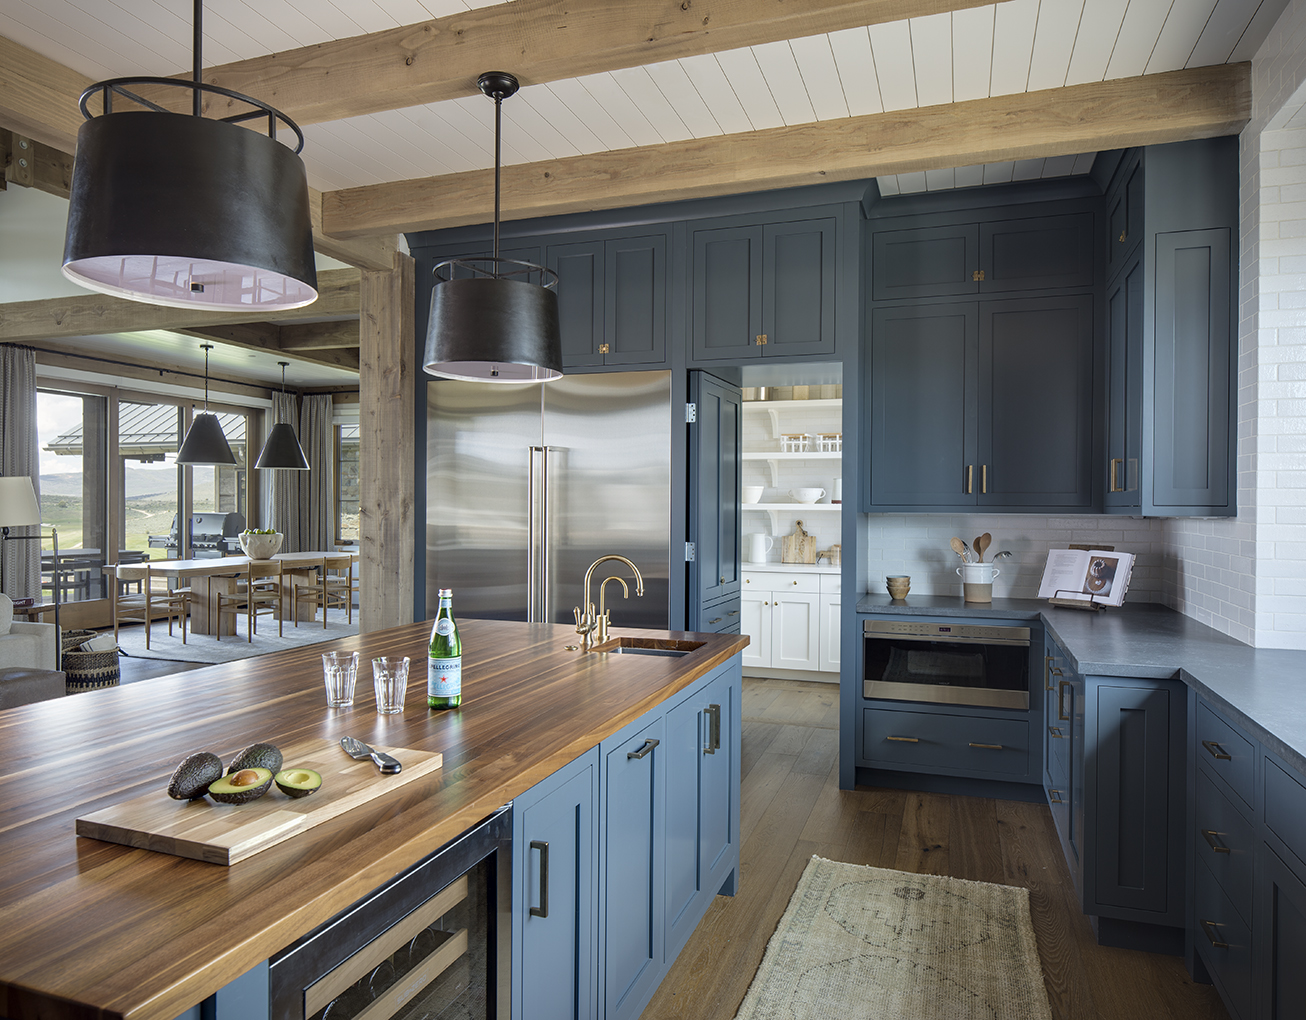 Interior photograph of a residential kitchen with views beyond to the dining area and beyond to the mountains of Park City, UT. All of the cabinets are blue and the ceiling is white bead board with exposed timber beams.